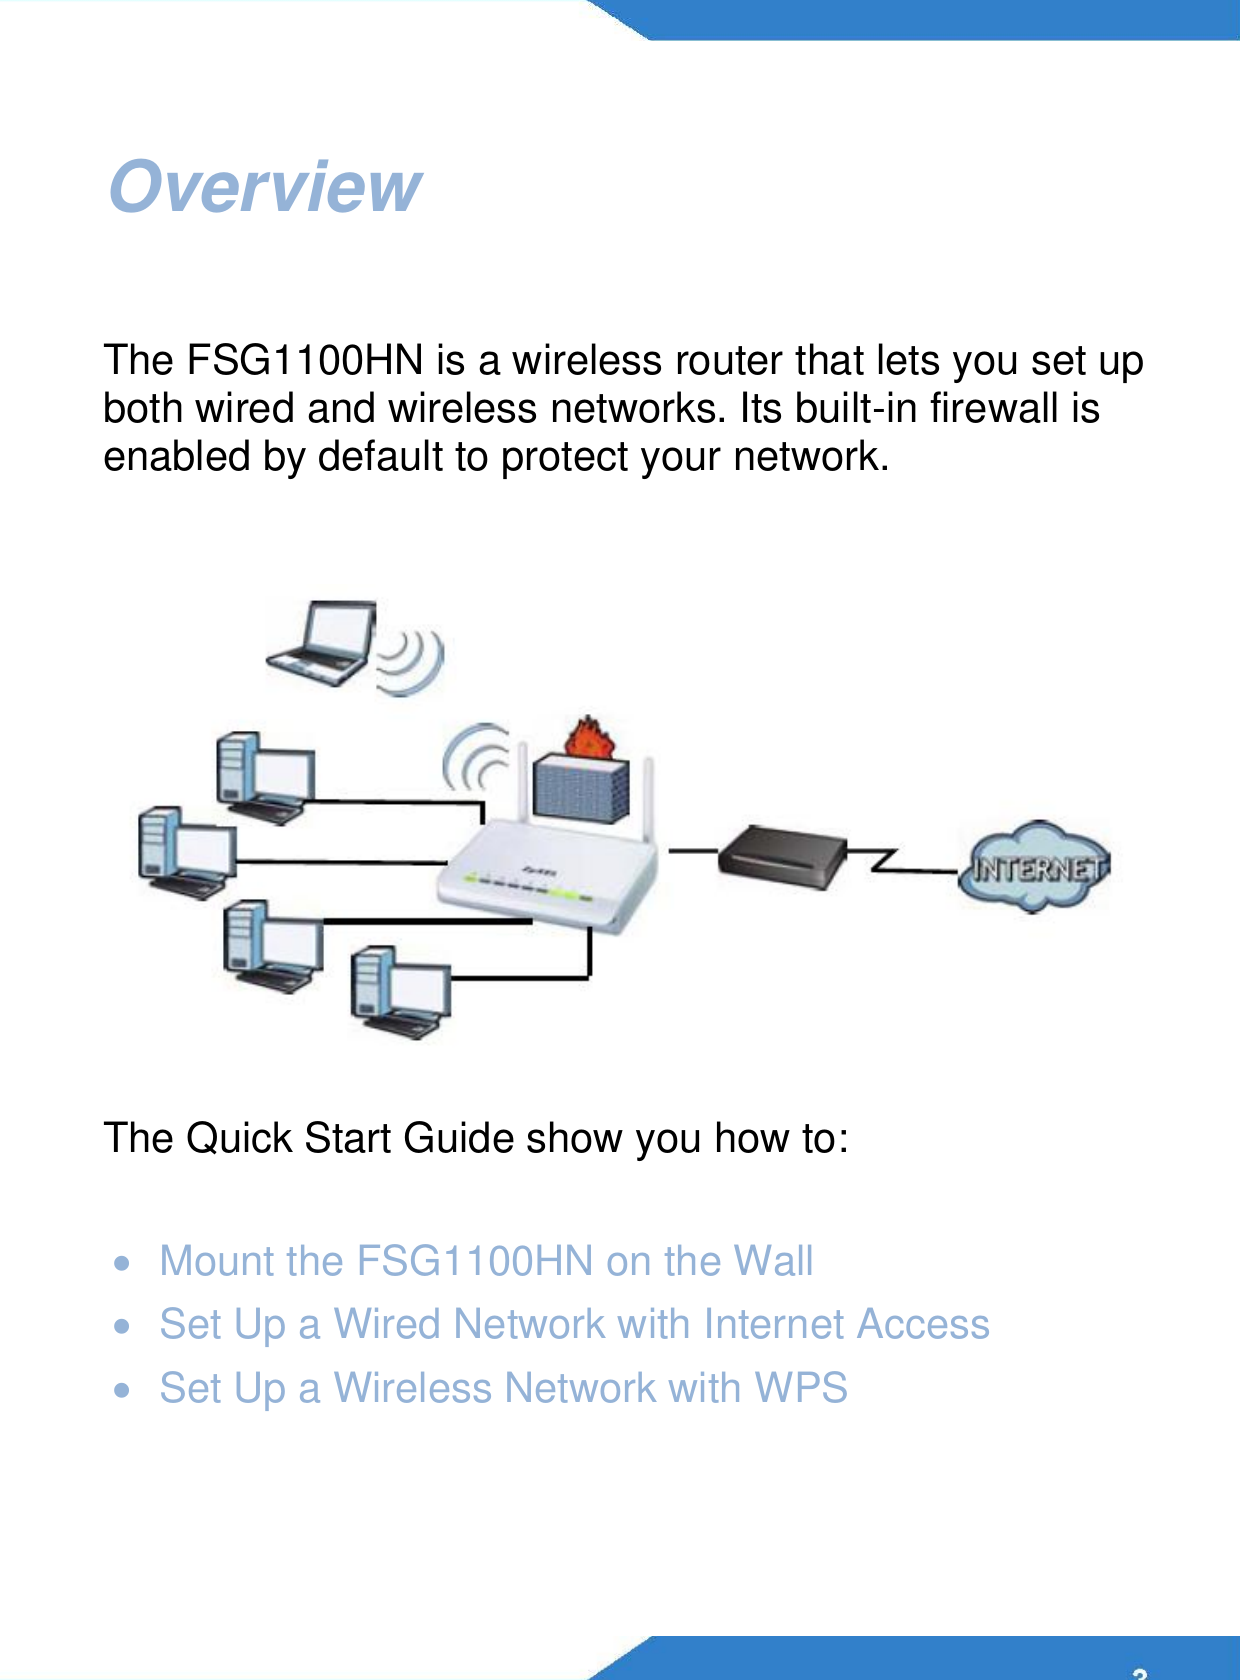      Overview                      The FSG1100HN is a wireless router that lets you set up both wired and wireless networks. Its built-in firewall is enabled by default to protect your network.         The Quick Start Guide show you how to:    Mount the FSG1100HN on the Wall   Set Up a Wired Network with Internet Access   Set Up a Wireless Network with WPS    